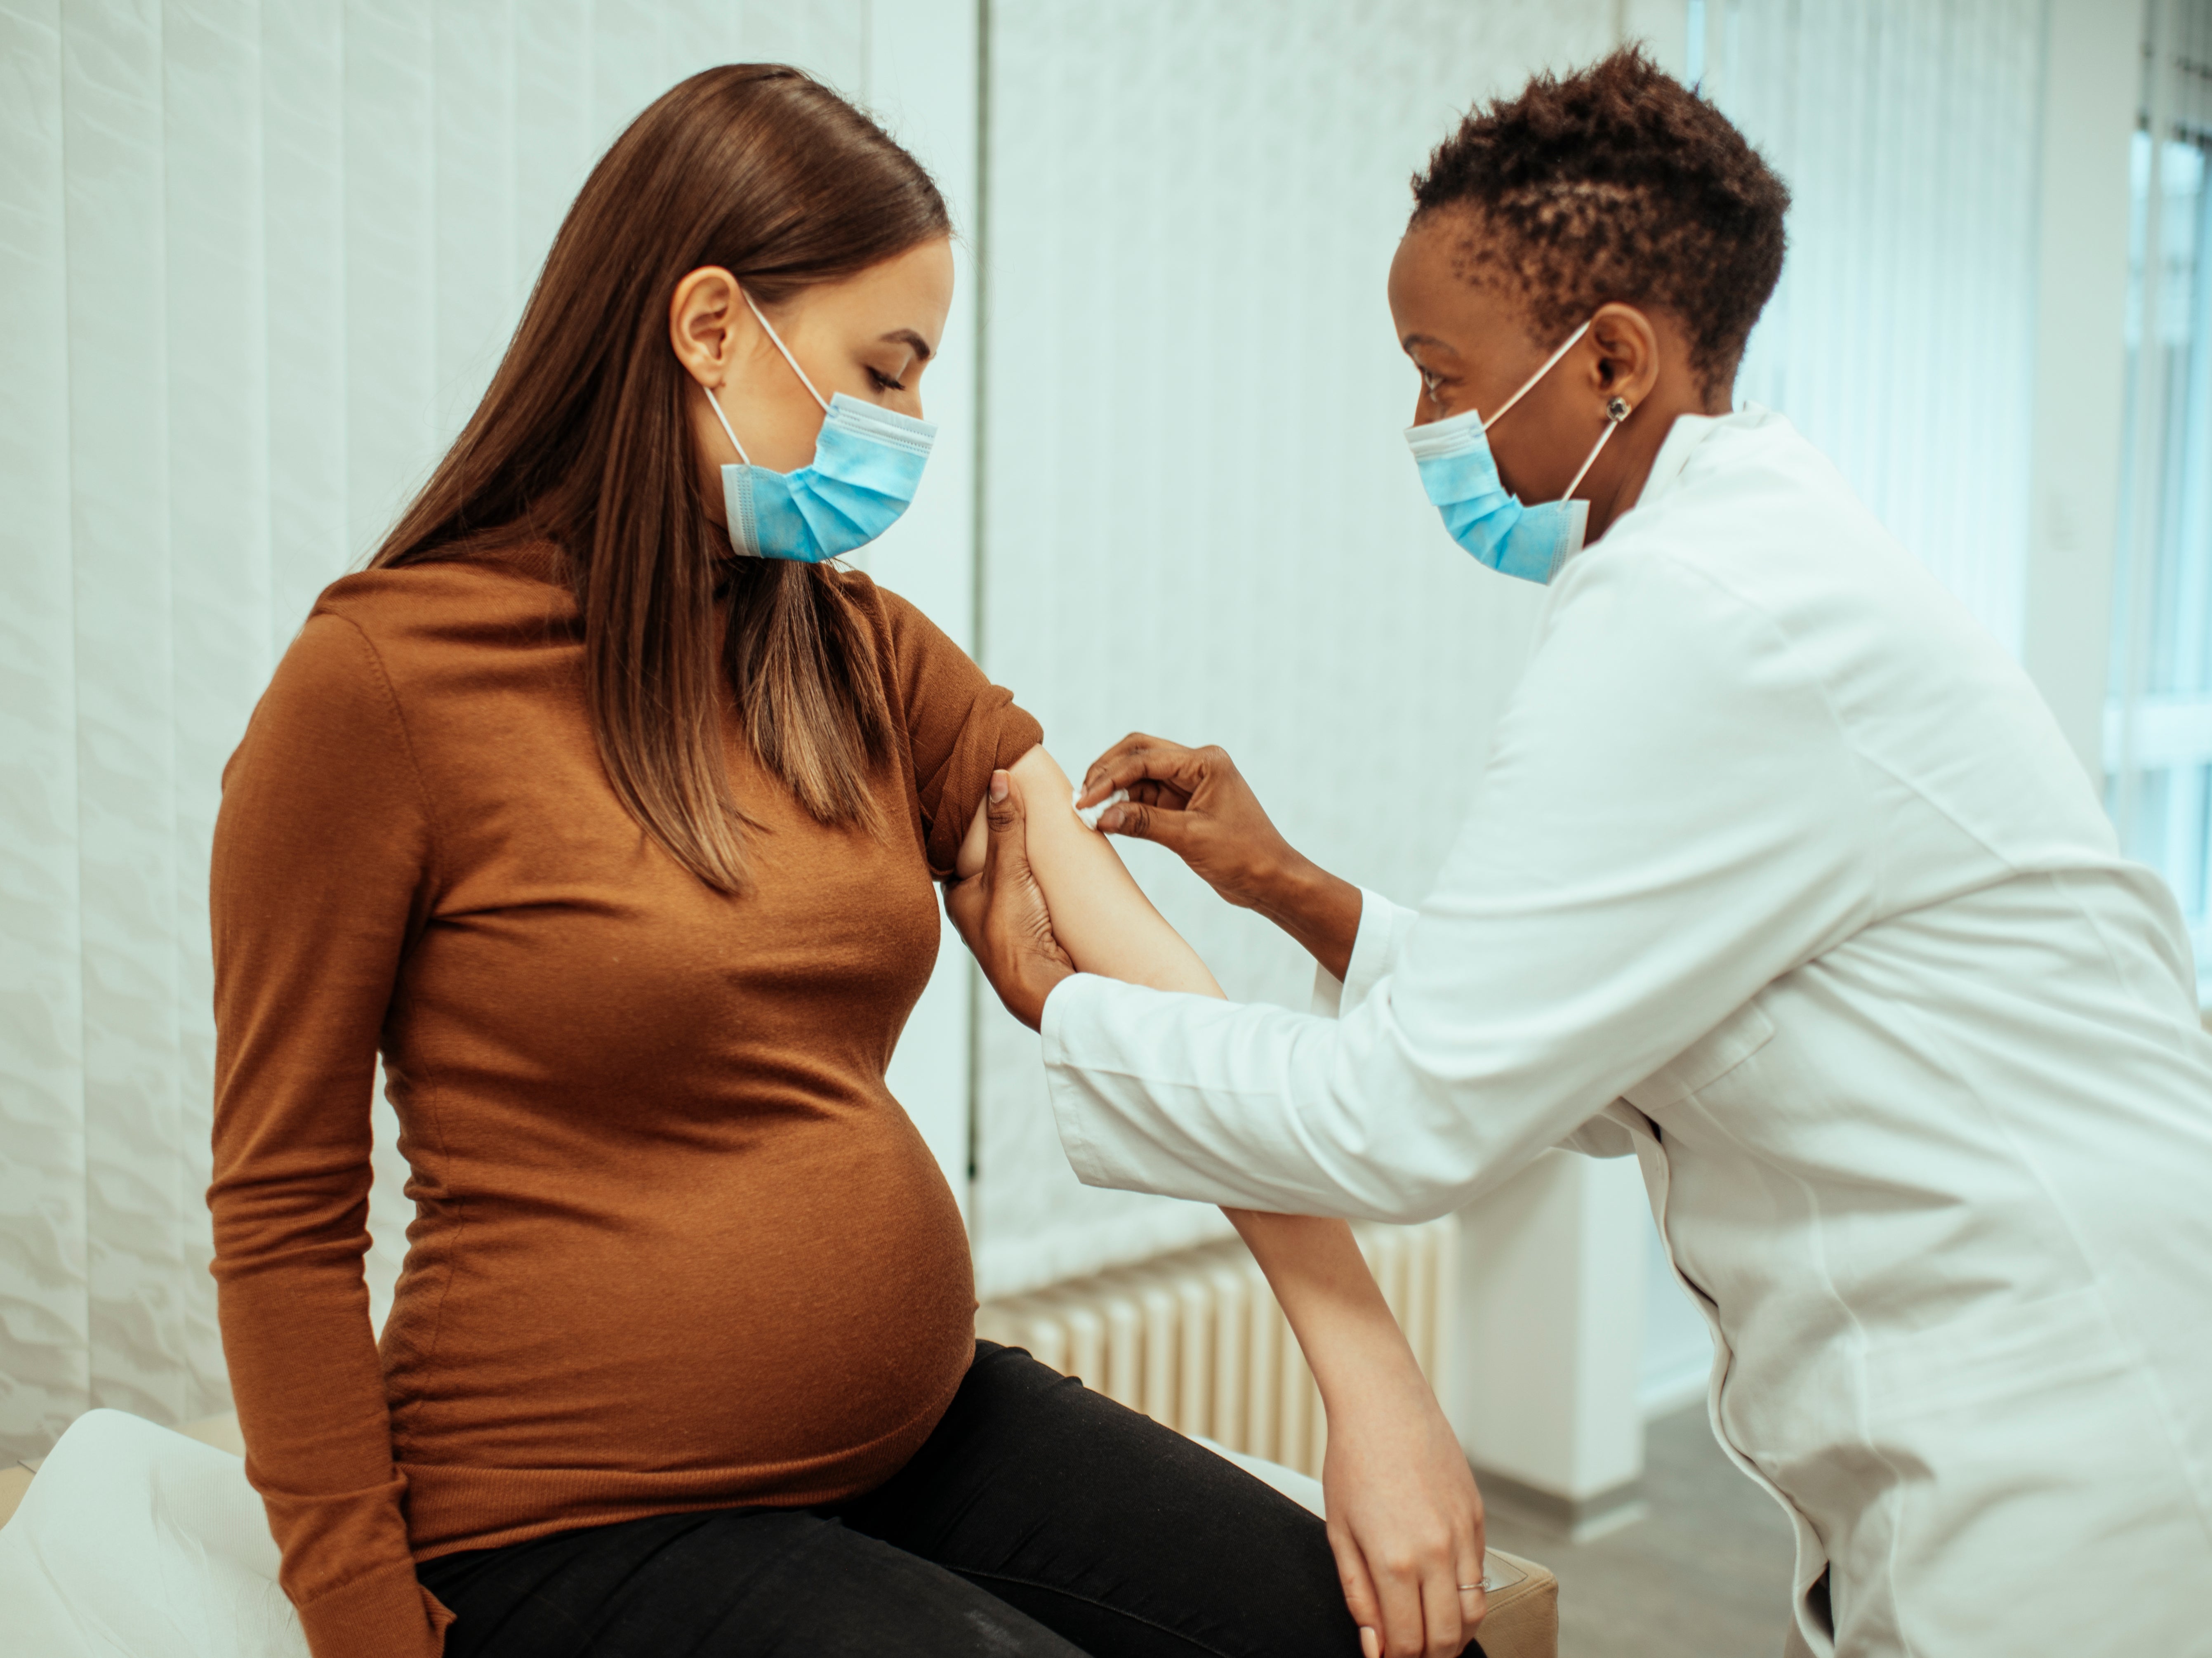 Doctors are urging more pregnant women to get vaccinated against coronavirus.